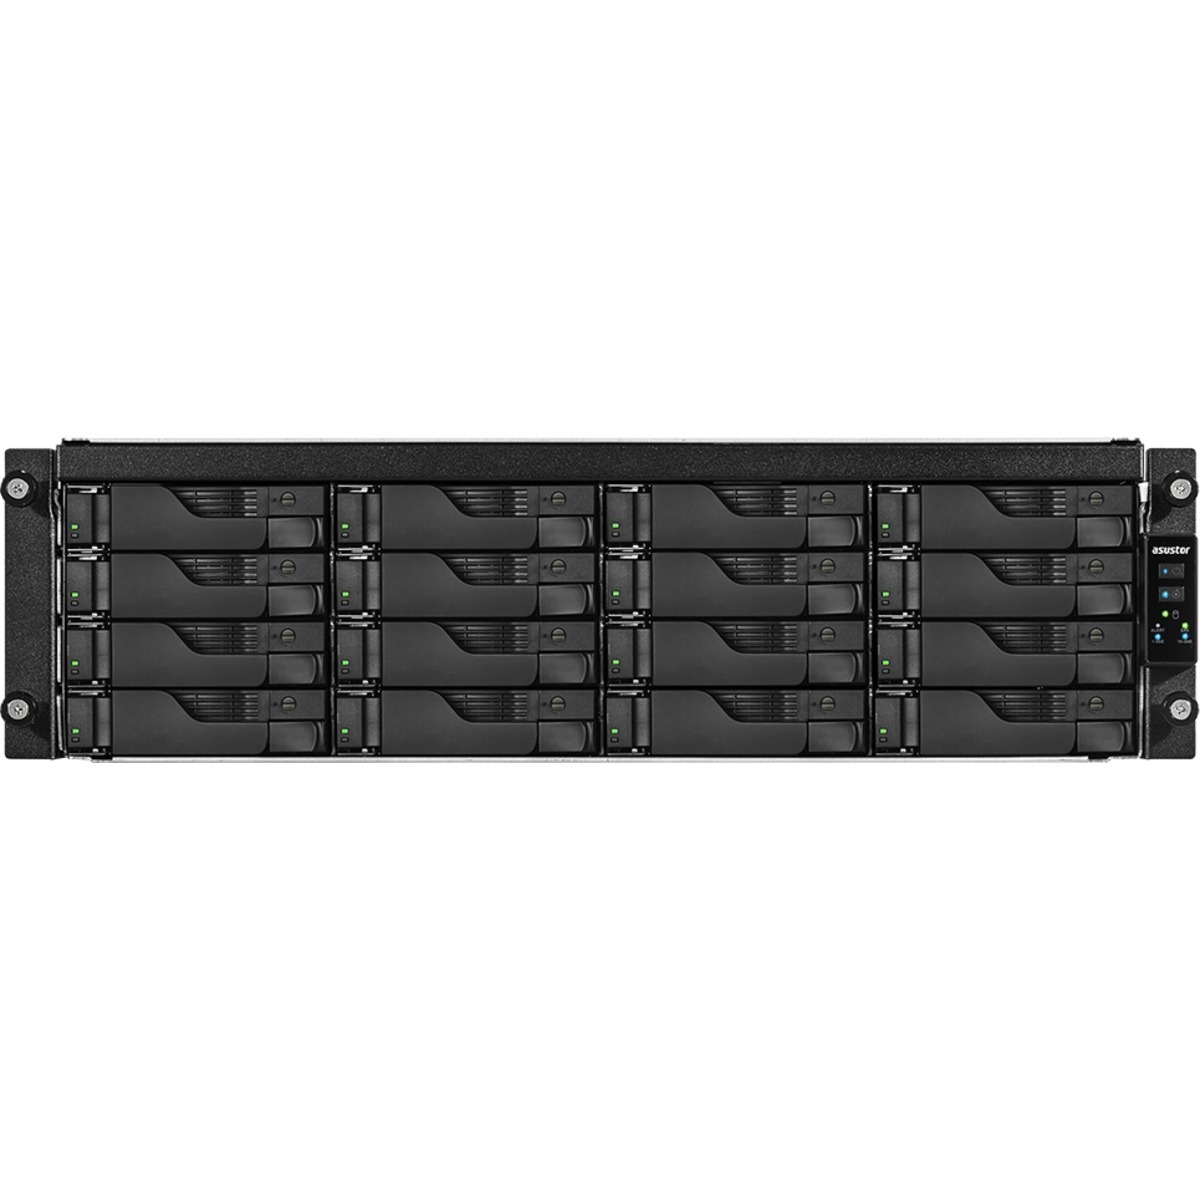 ASUSTOR AS7116RDX Lockerstor 16R Pro 78tb 16-Bay RackMount Large Business / Enterprise NAS - Network Attached Storage Device 13x6tb Seagate BarraCuda ST6000DM003 3.5 5400rpm SATA 6Gb/s HDD CONSUMER Class Drives Installed - Burn-In Tested AS7116RDX Lockerstor 16R Pro